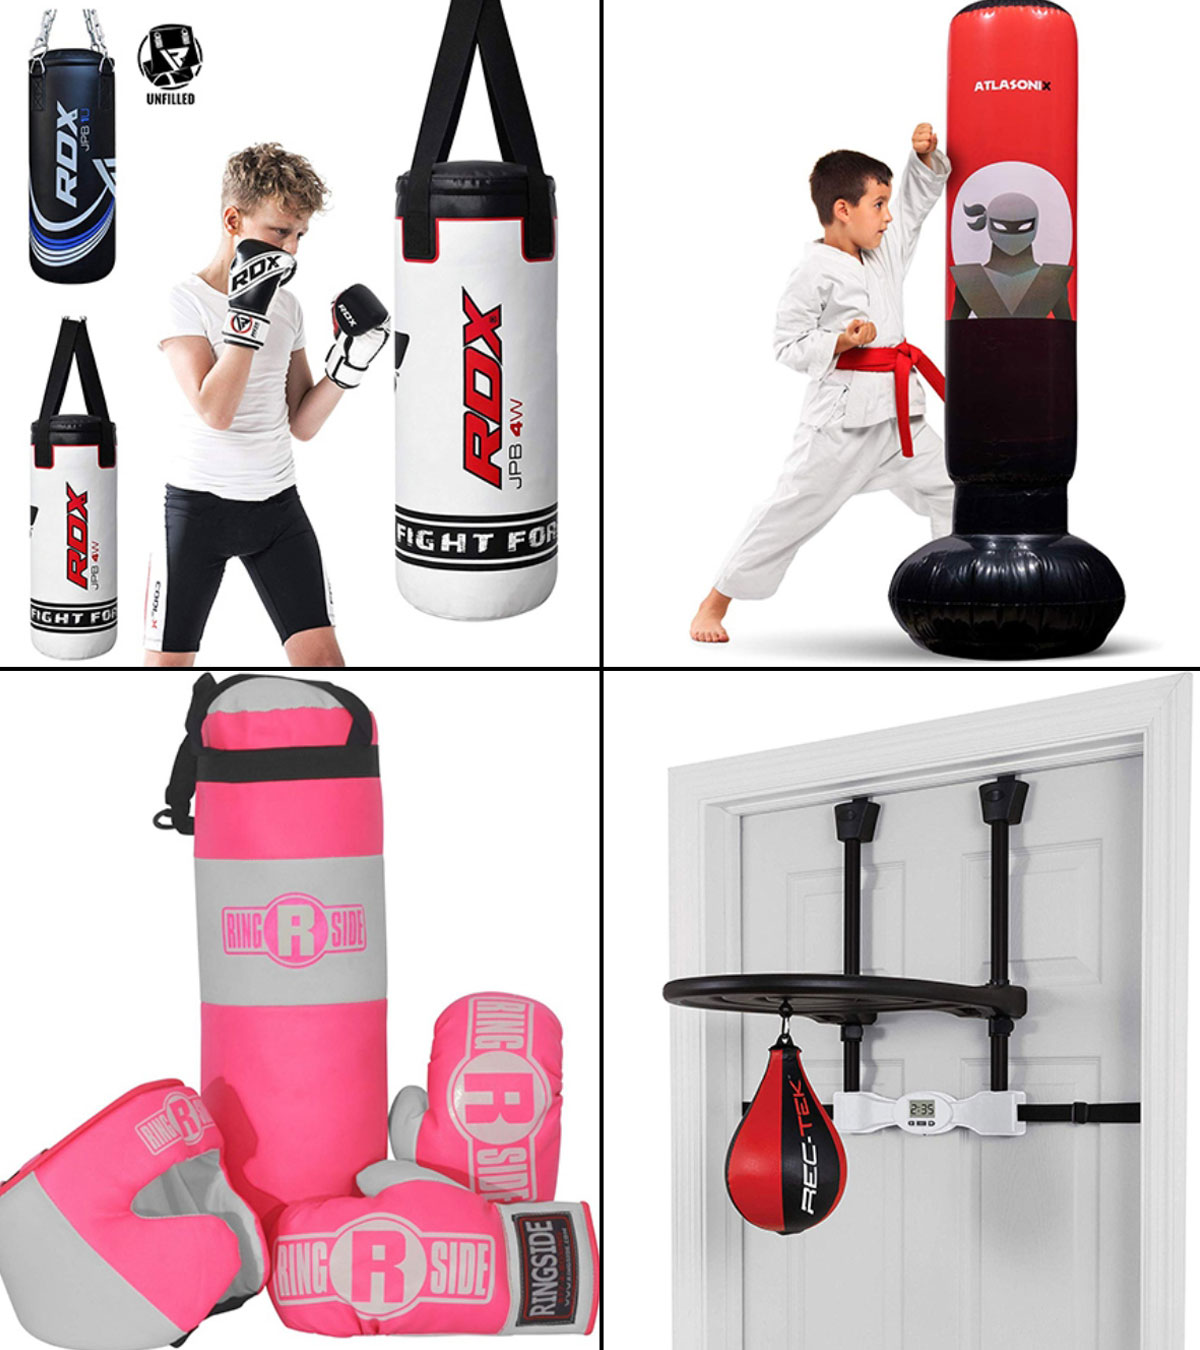 Caucasian Male Wearing a Black T-shirt and Shorts Punching a Hanging Boxing  Bag in a Gym Setting Stock Image - Image of jump, flexible: 275599789